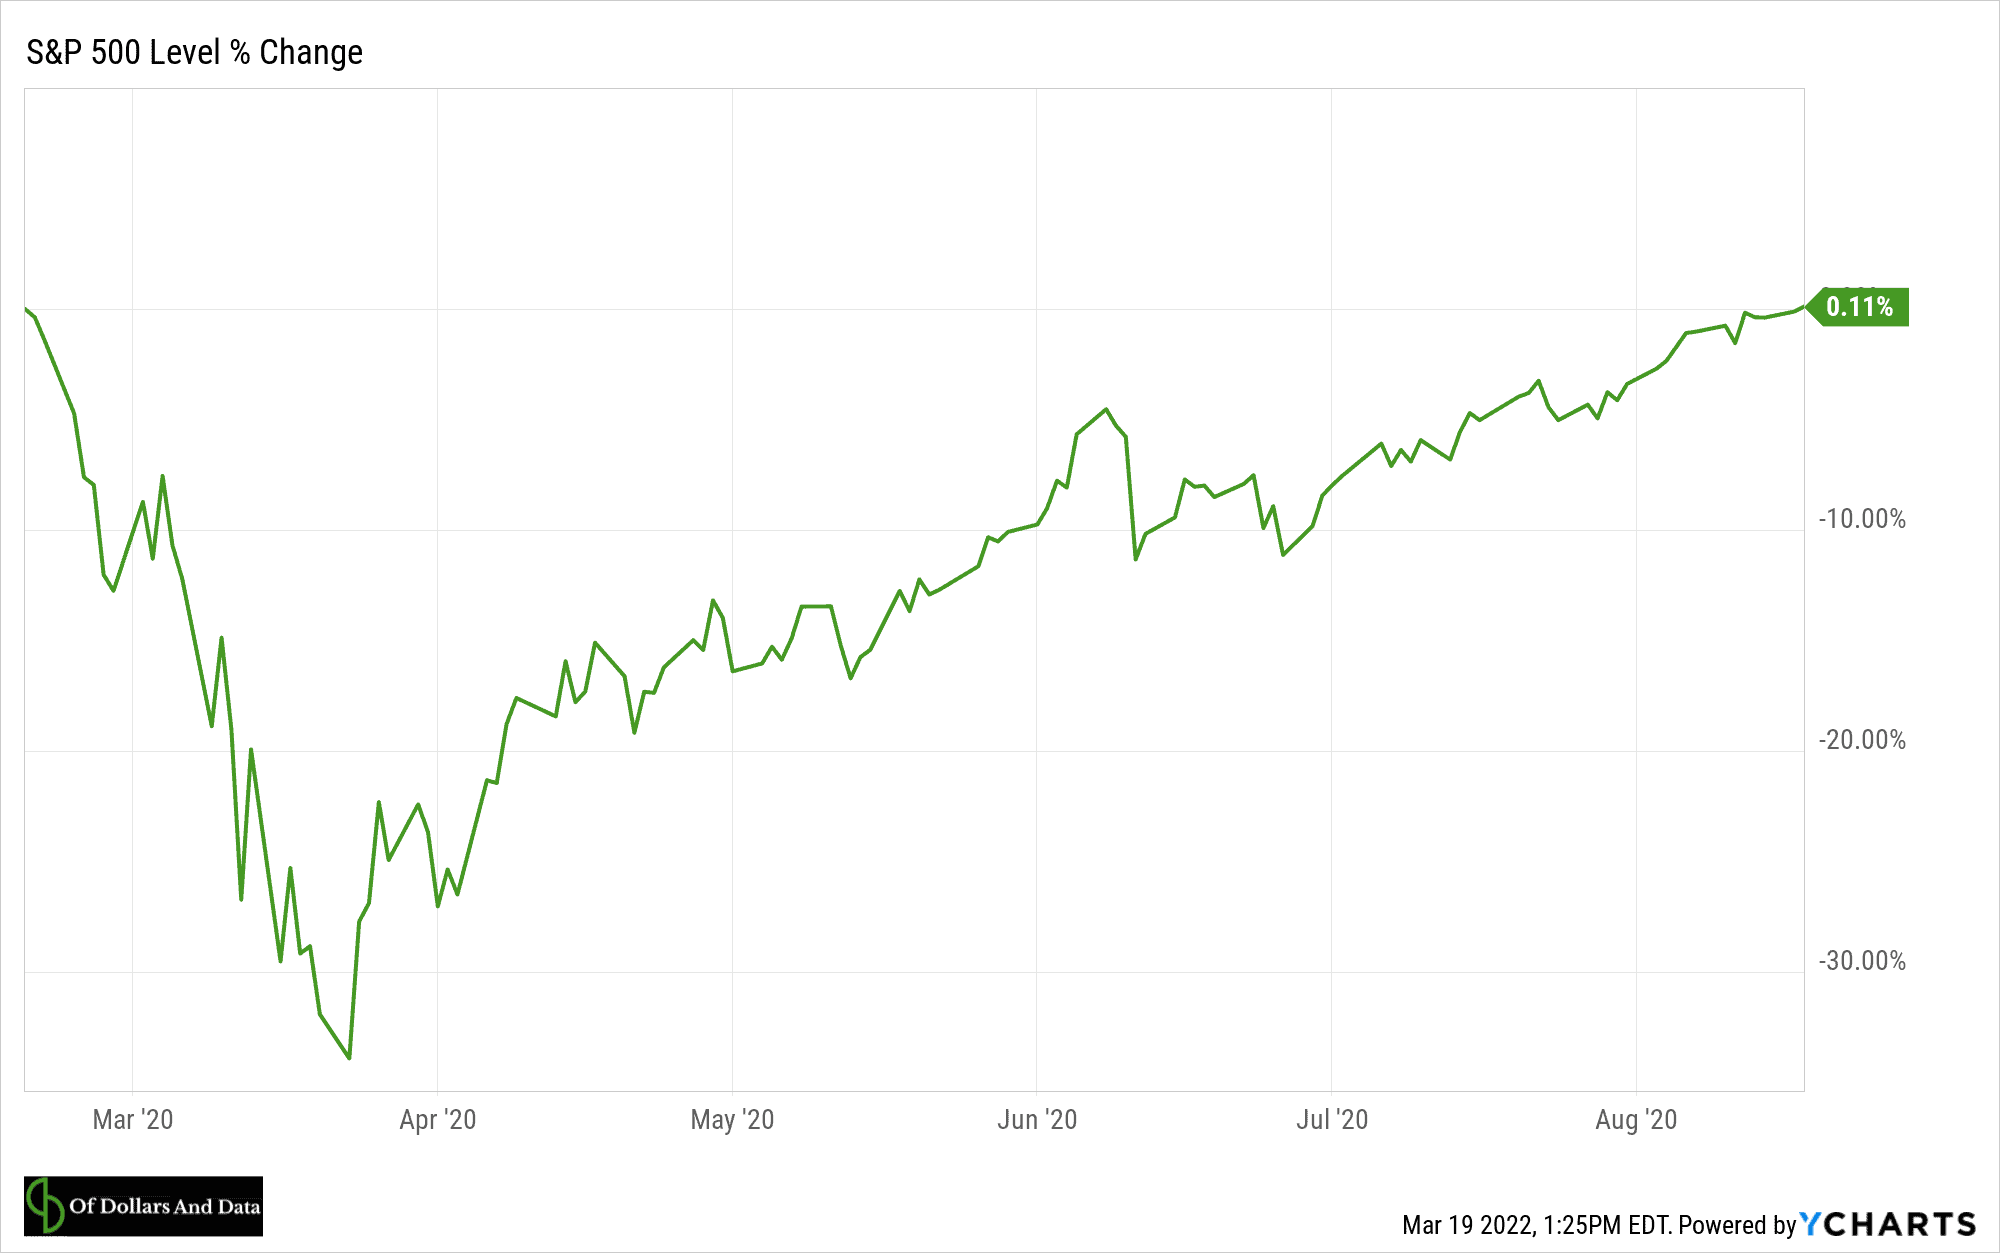 S&P 500 level change from February 2020 through to September 2020.